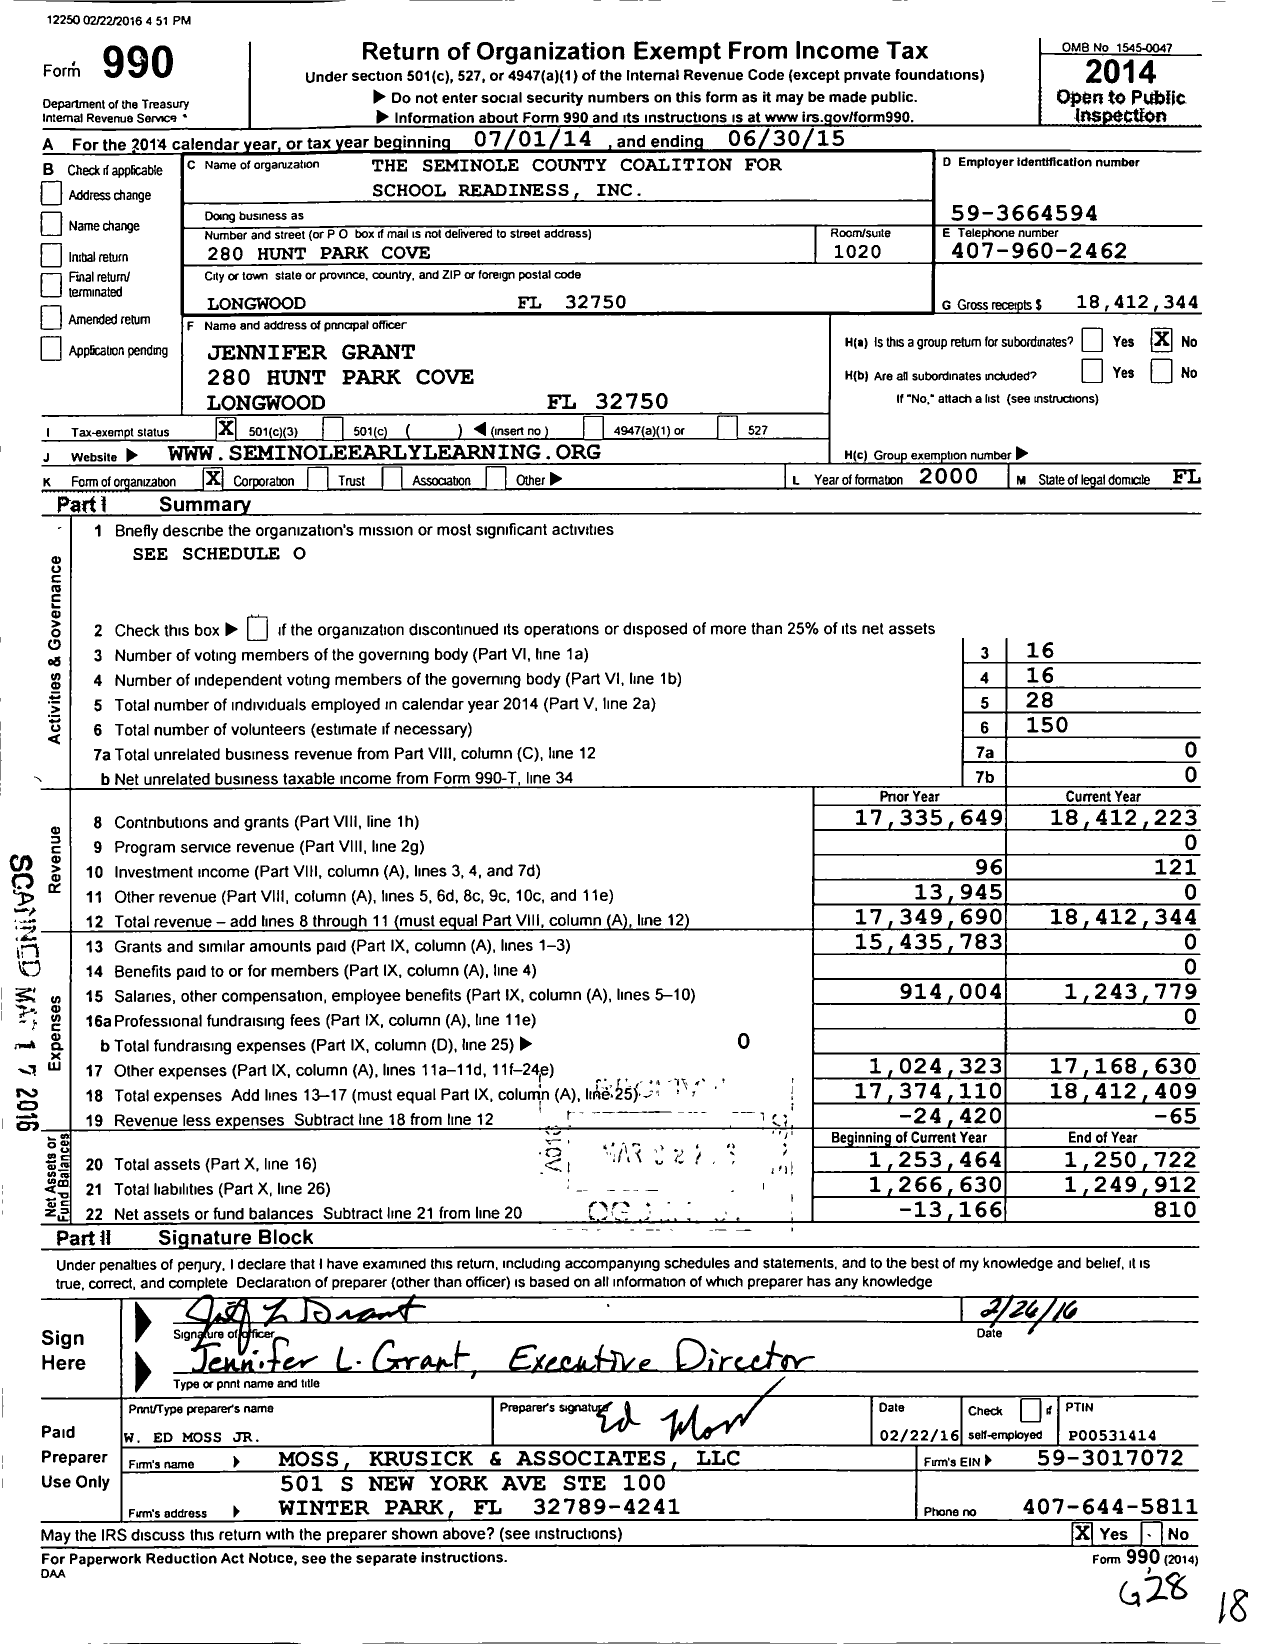 Image of first page of 2014 Form 990 for The Seminole County Coalition for School Readiness